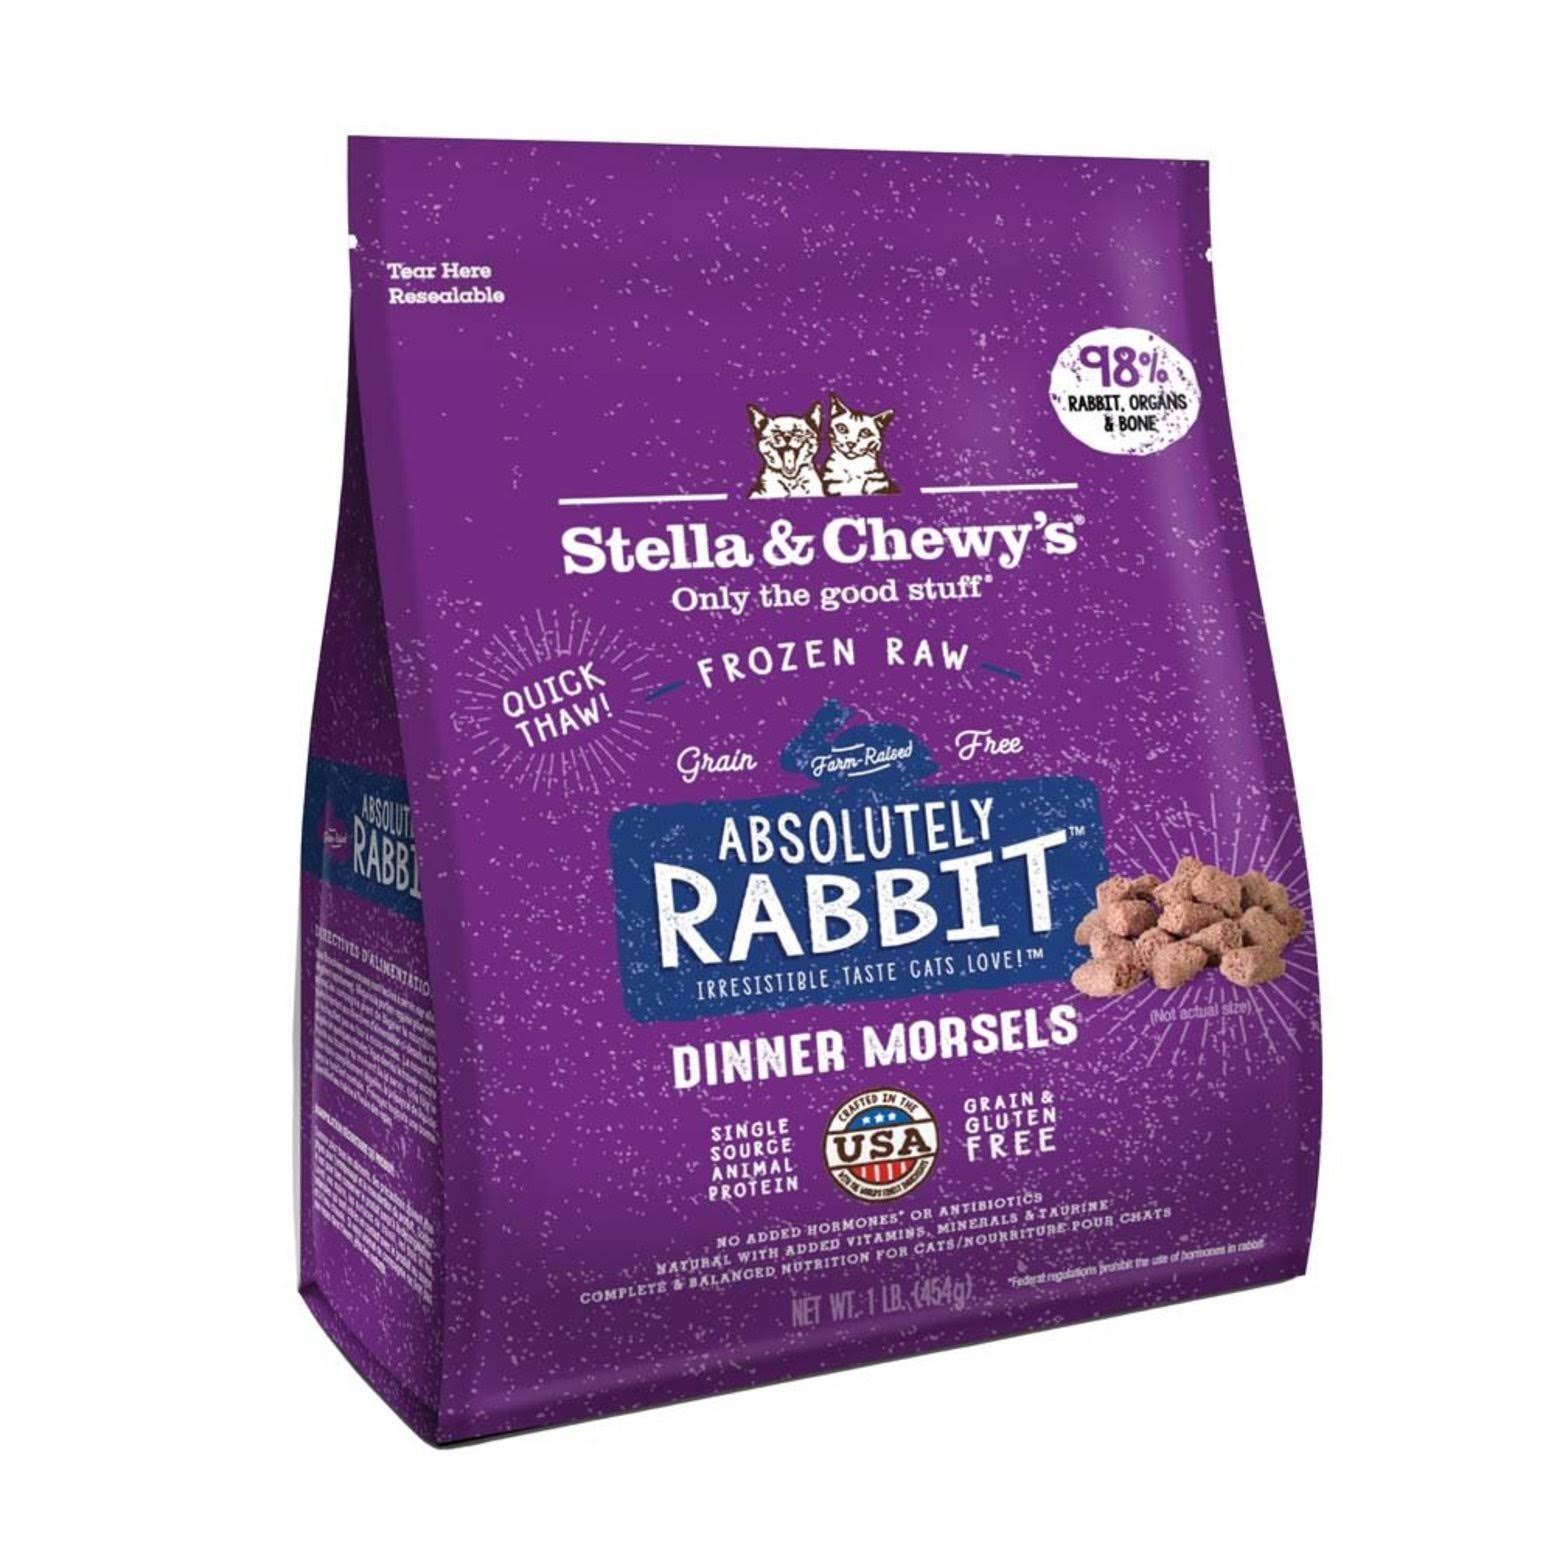 Stella & Chewy's Absolutely Rabbit Frozen Dinner Morsels for cats 1lb.